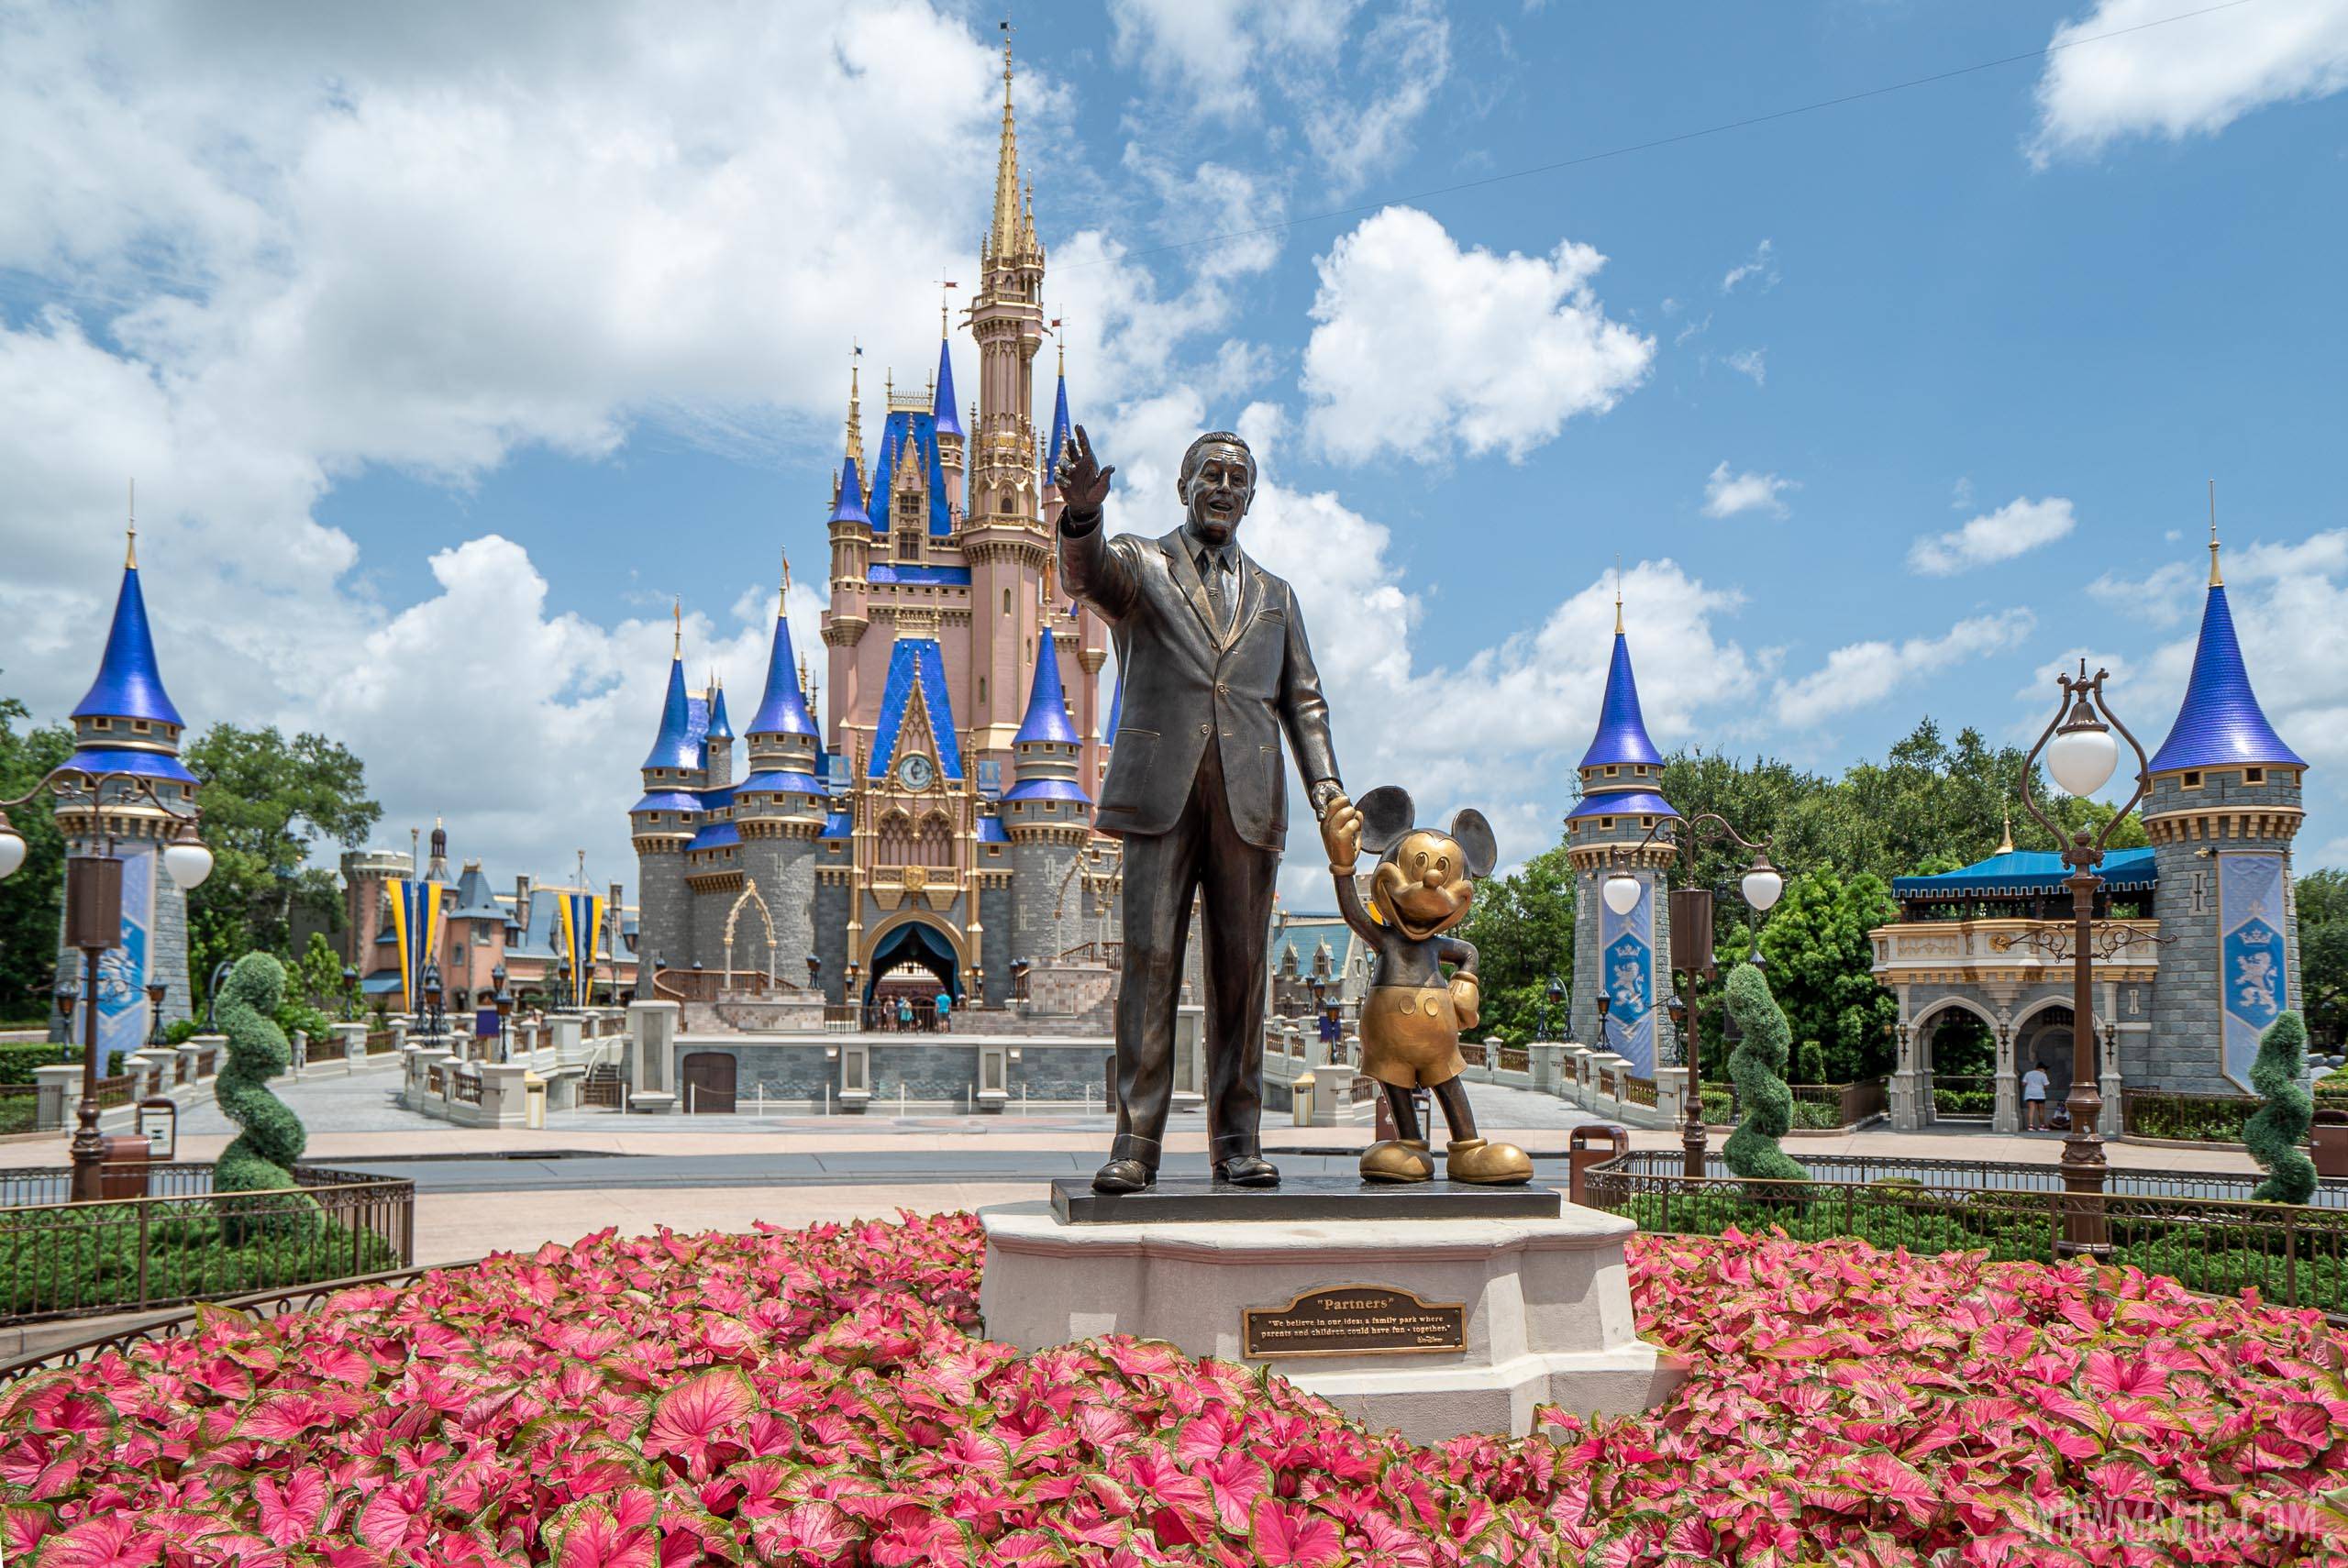 Disney Launches New Disability Access Service Policy at Walt Disney World